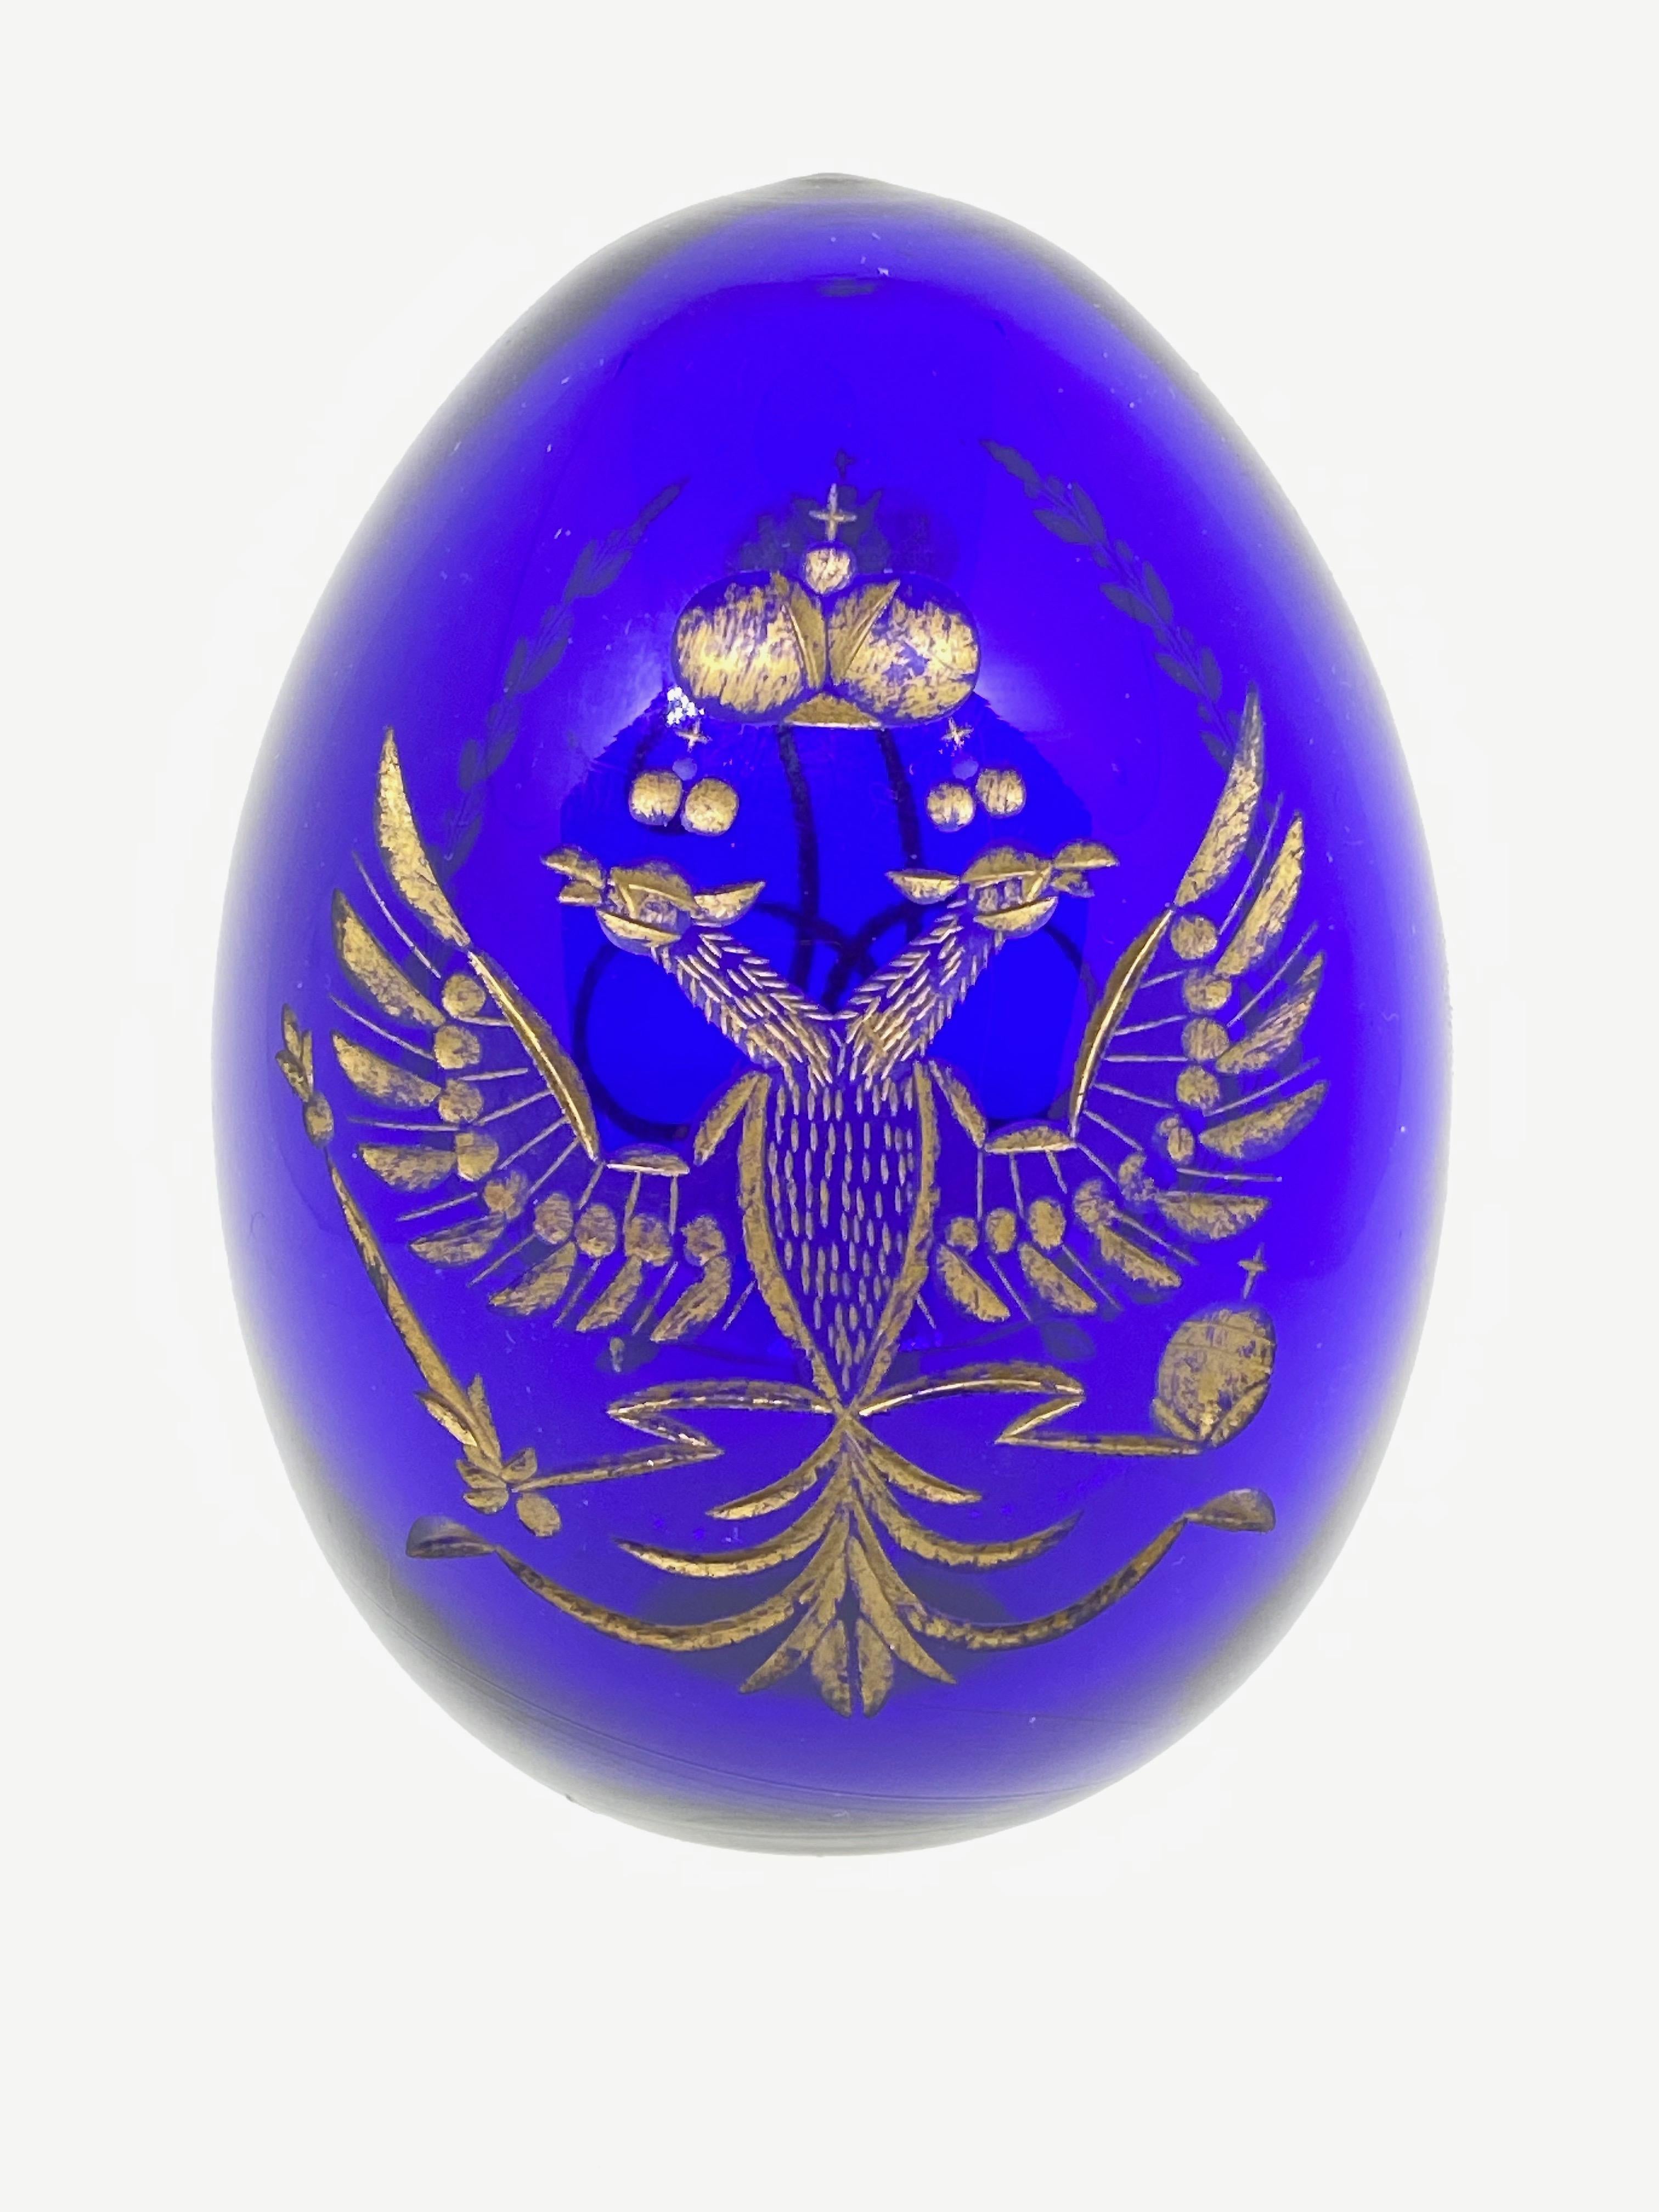 Vintage Faberge Russia style glass egg with etched Russian coat of arms. Reminiscent of eggs from St. Petersburg. Nice addition to your collection or just as decorative piece.